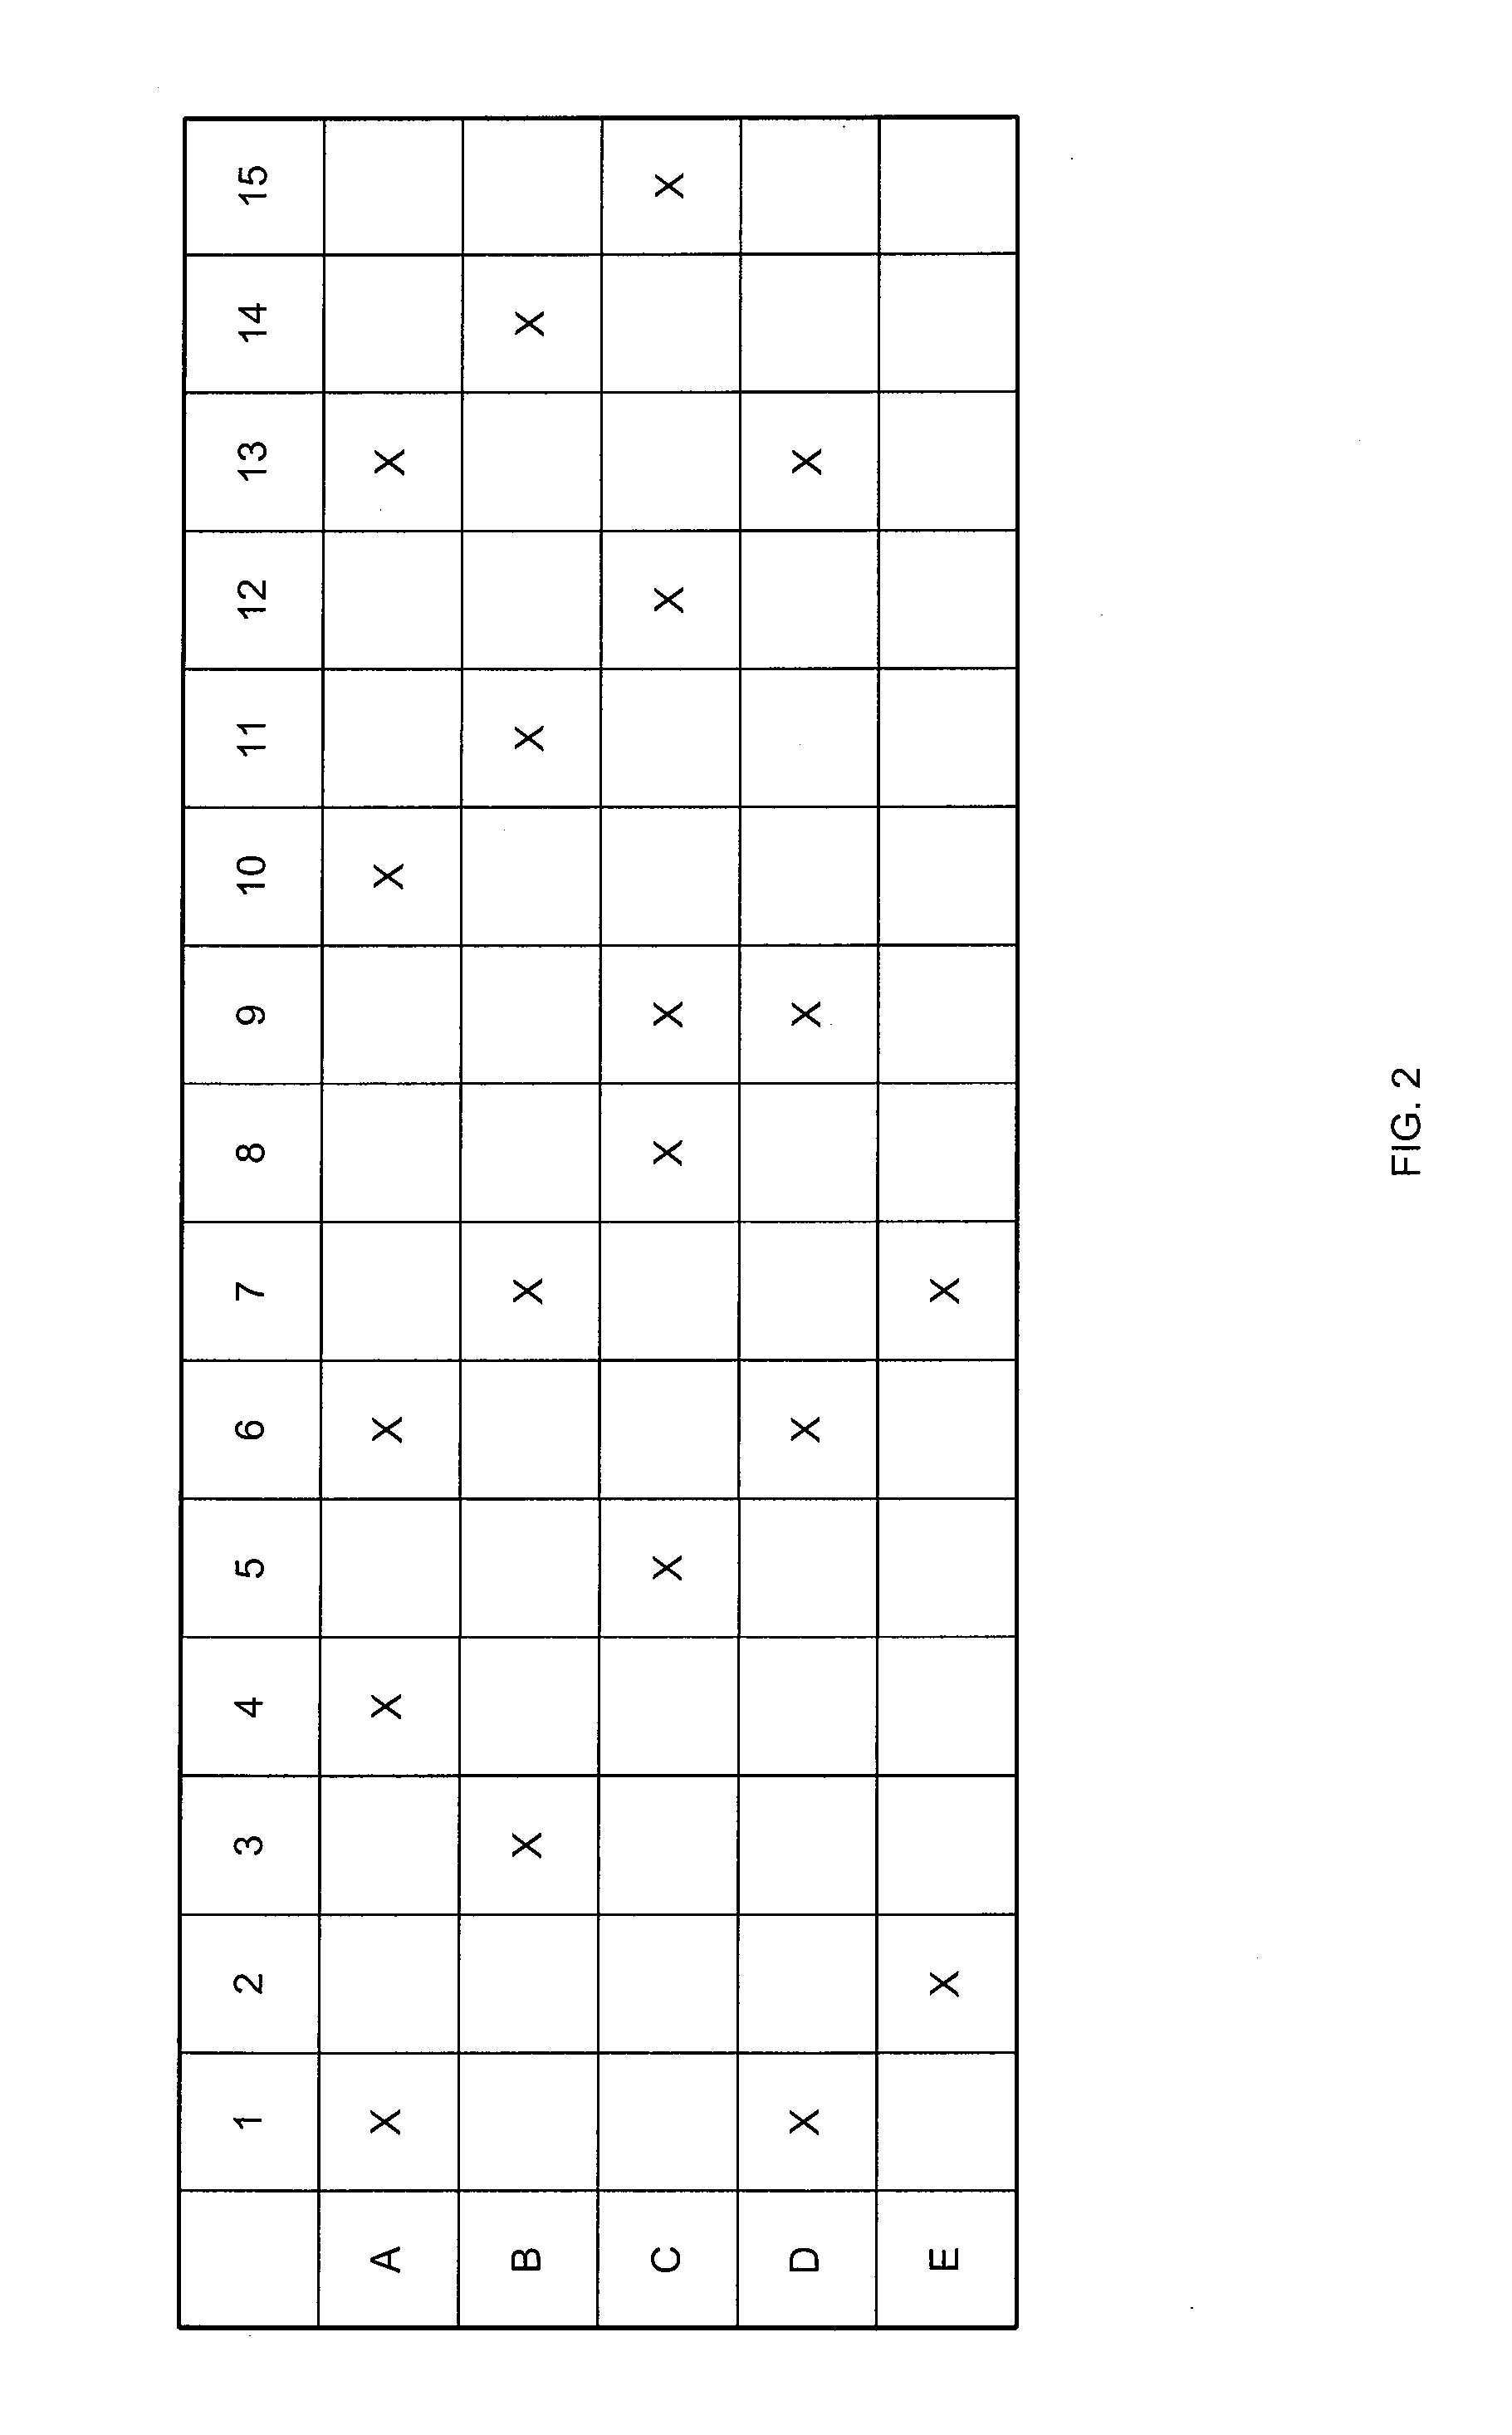 System and method for efficient retransmission over a satelline network